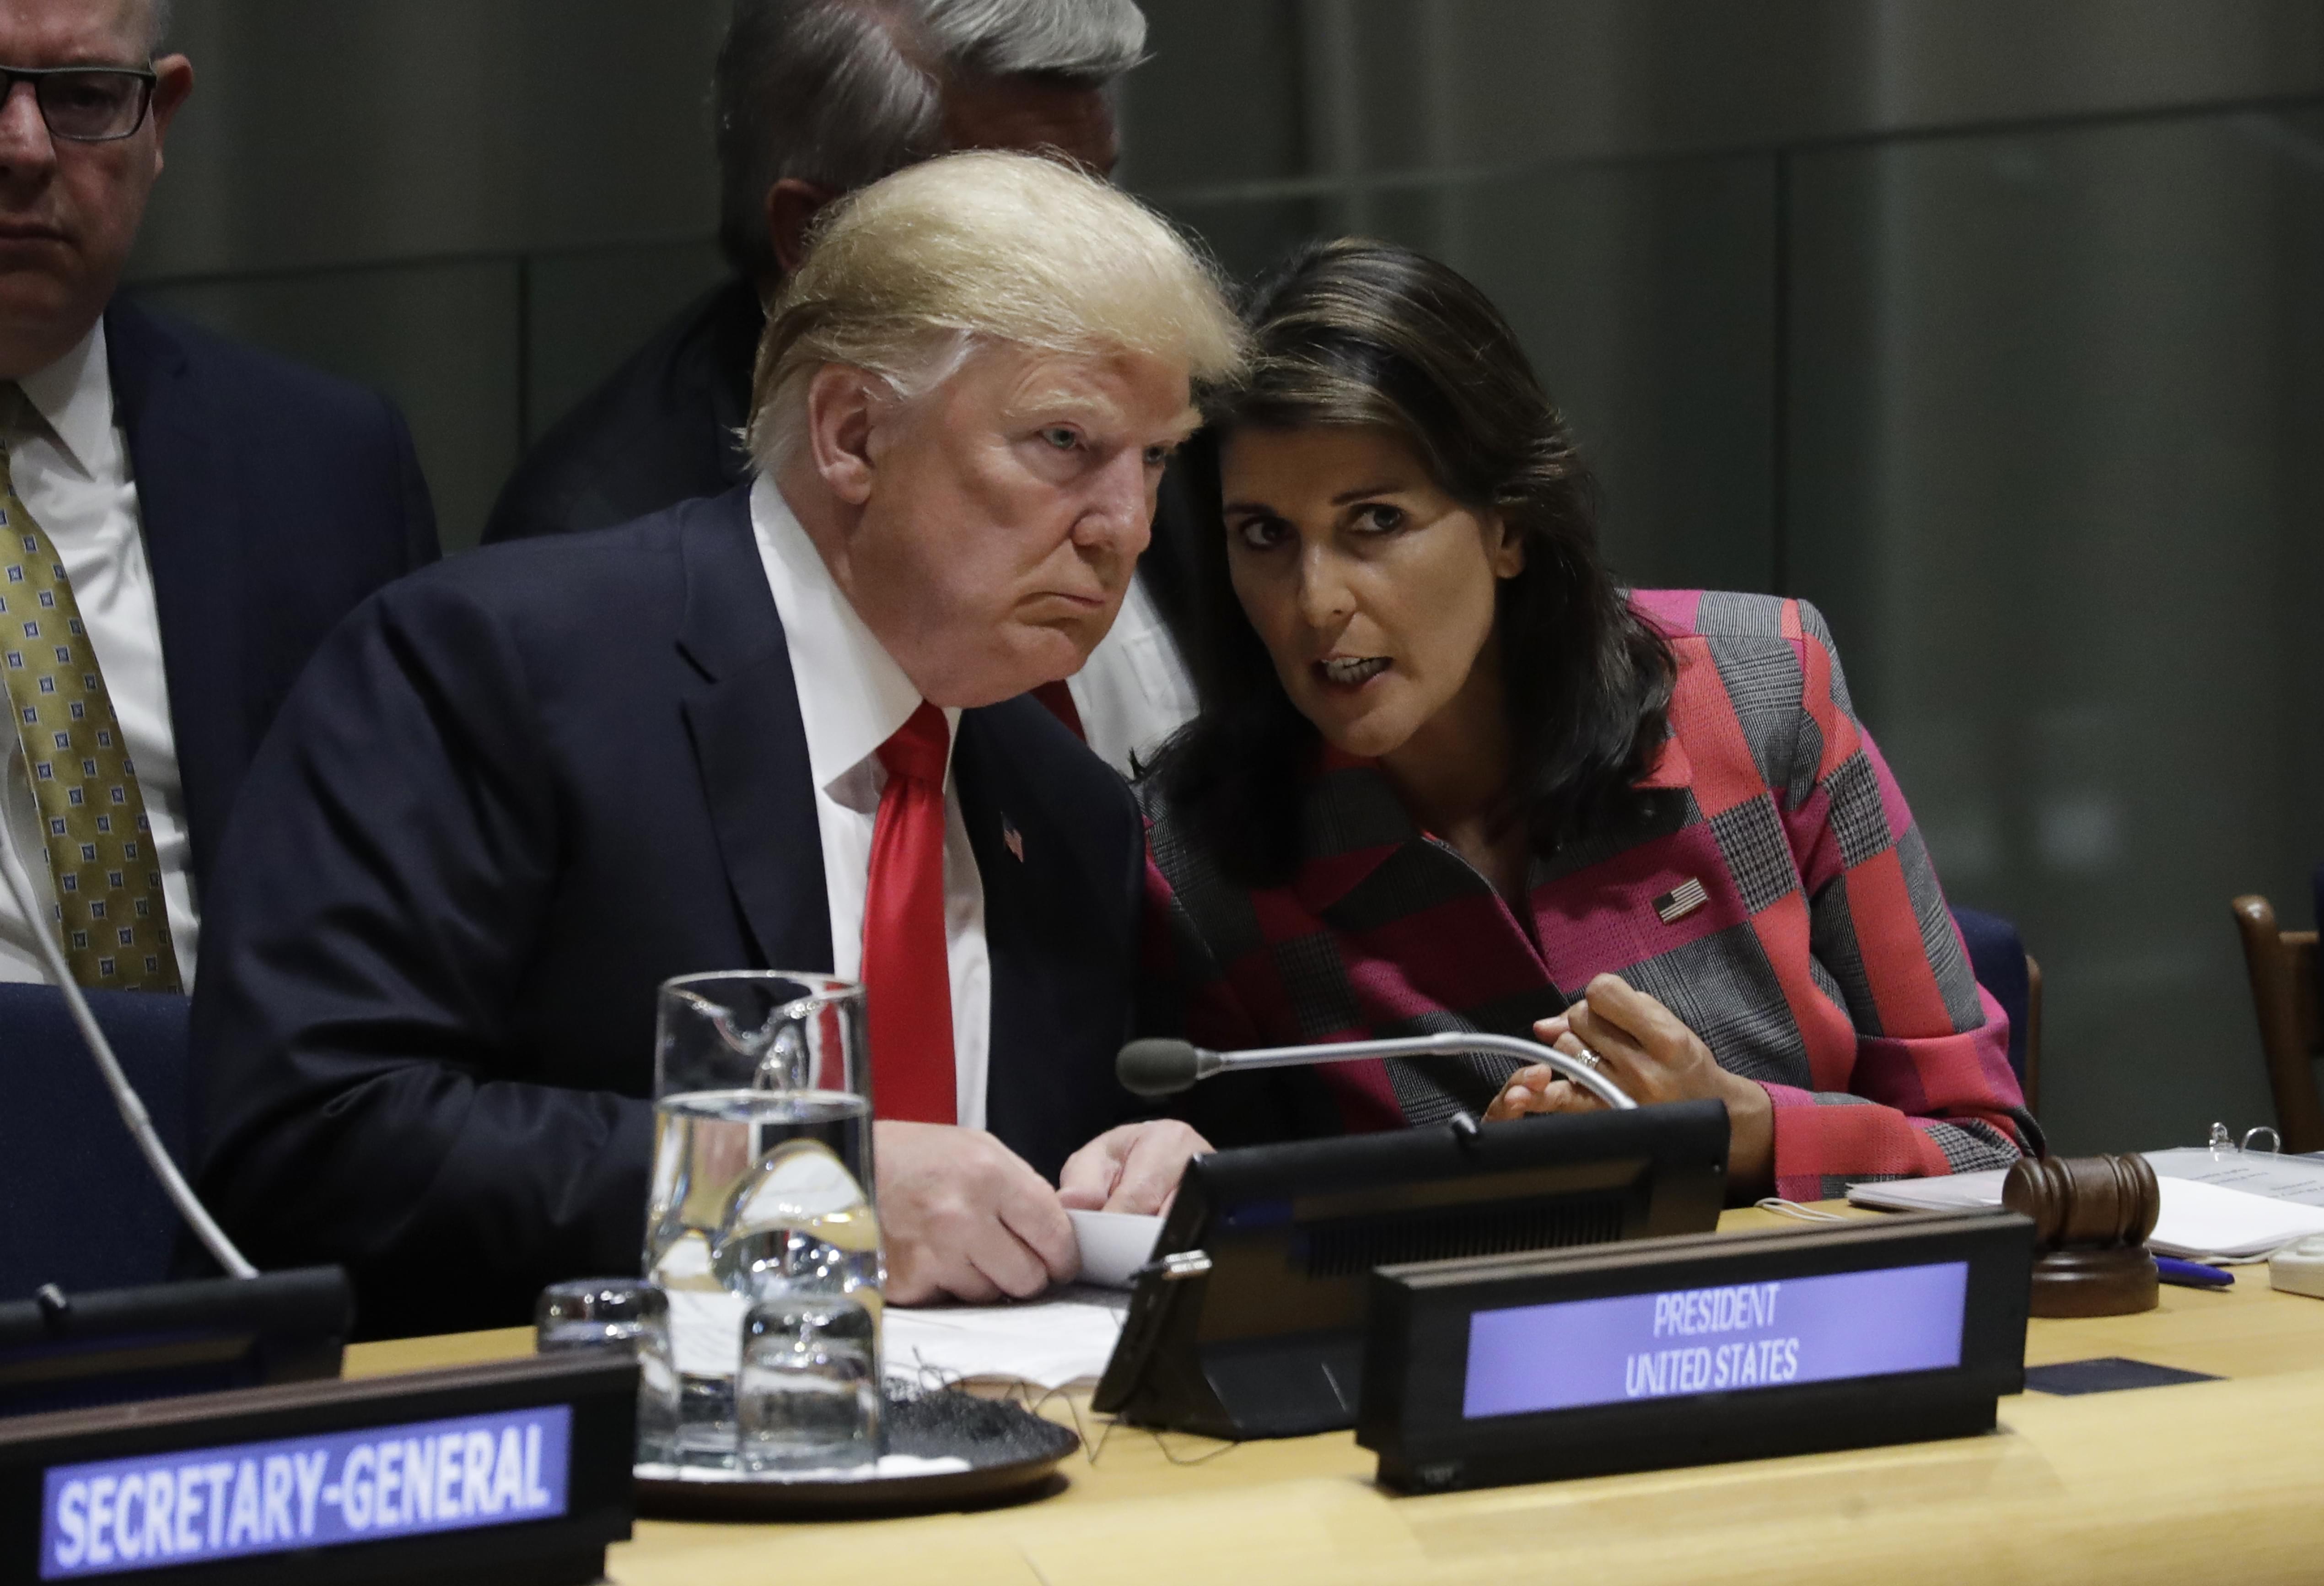 President Donald Trump talks to Nikki Haley, the U.S. ambassador to the United Nations, at the United Nations General Assembly, Monday, Sept. 24, 2018, at U.N. Headquarters.